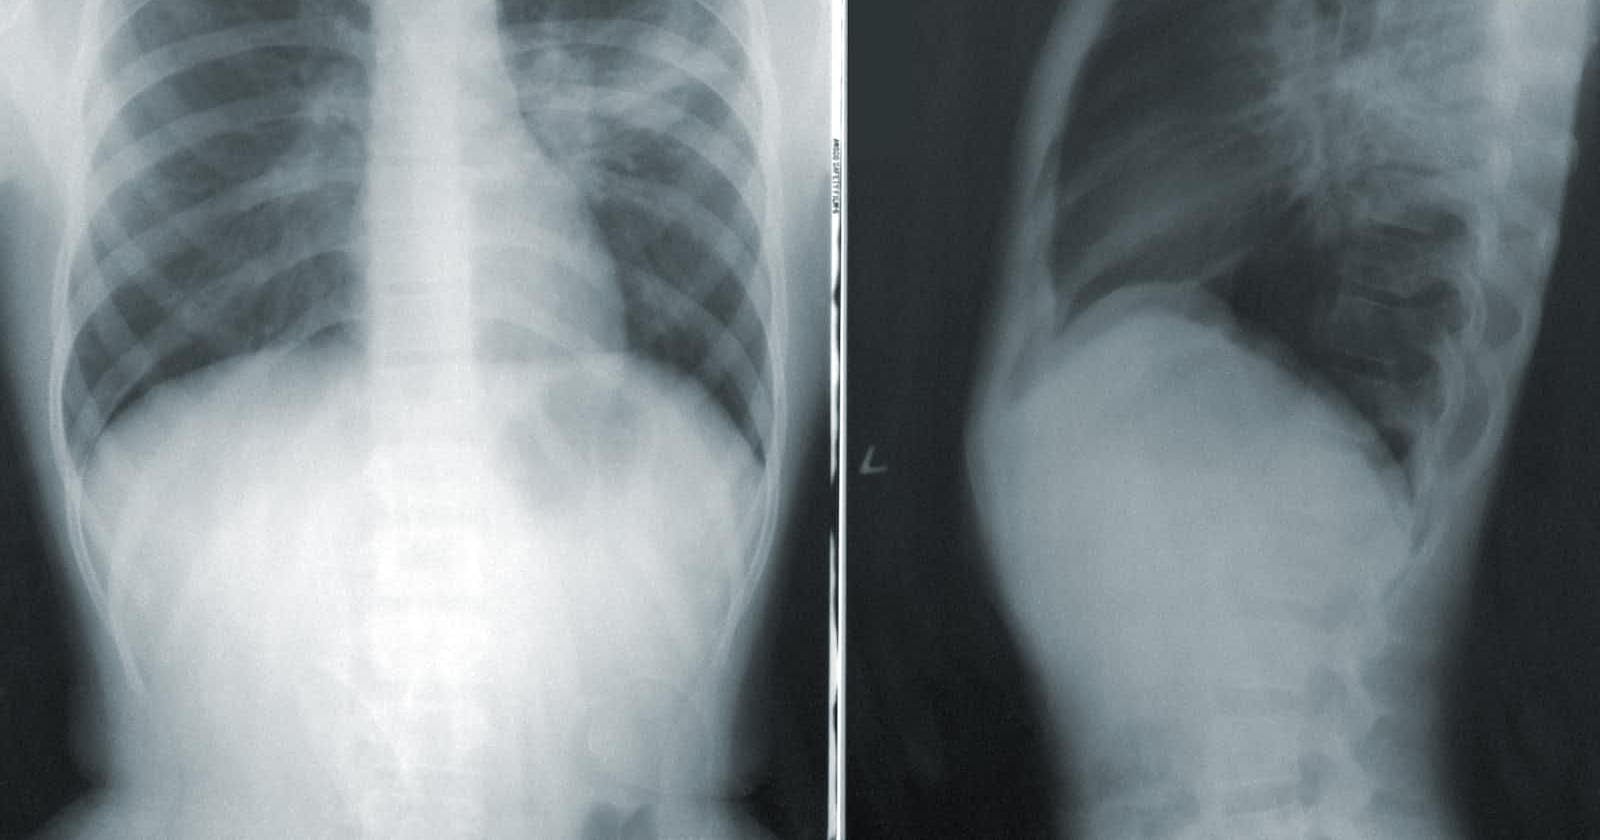 Decoding the Shadows: Pneumonia Classification in Chest X-rays 🫁📸